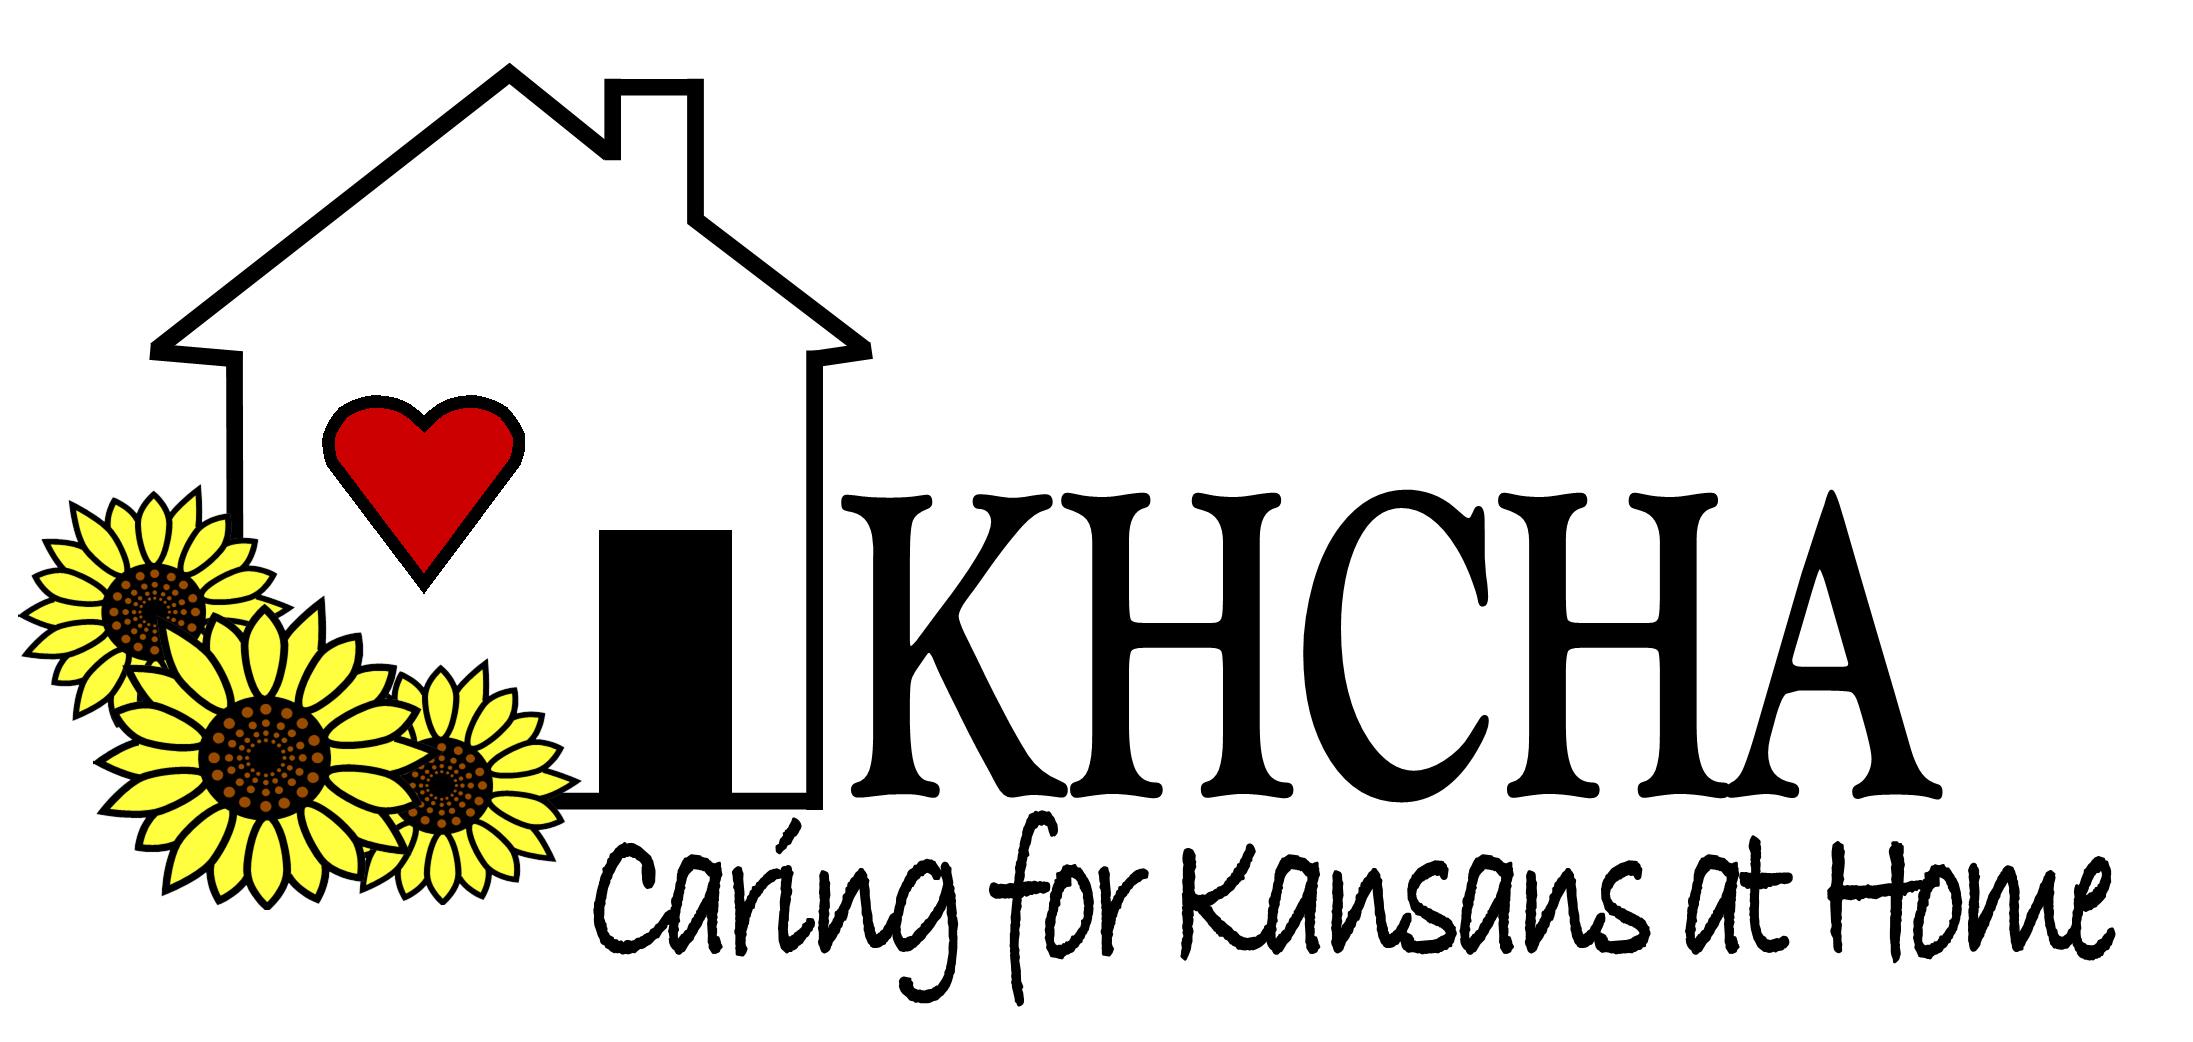 Kansas Home Care & Hospice Association is a client of Chris Zervas, an employee engagement and retention keynote speaker in Oklahoma